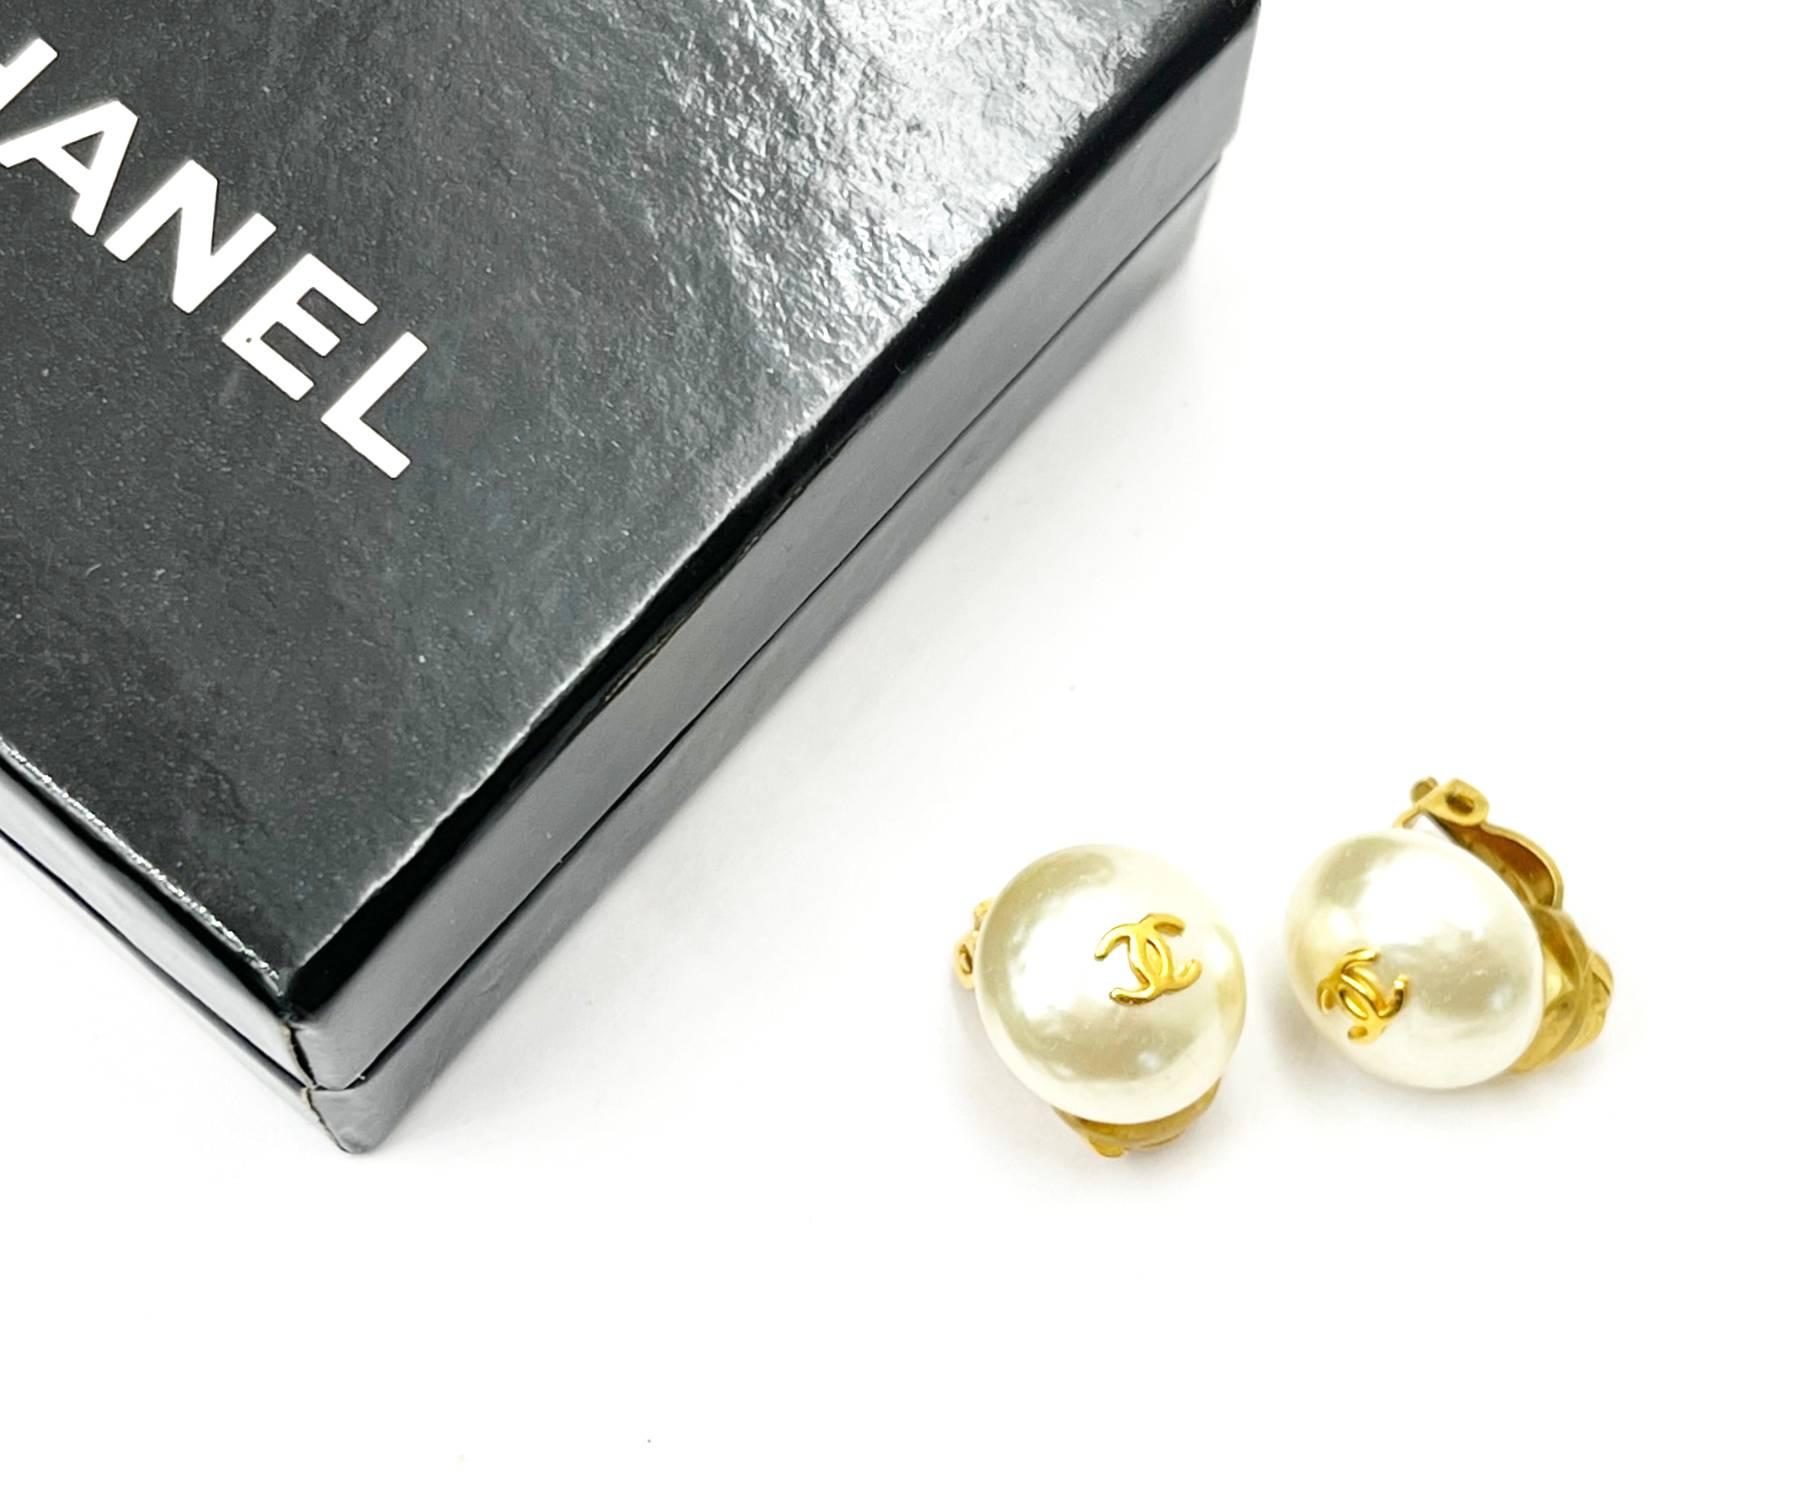 Chanel Classic Gold Plated CC Small Pearl Clip on Earrings

*Marked 95
*Made in France
*Comes with the original box

-Approximately 0.55